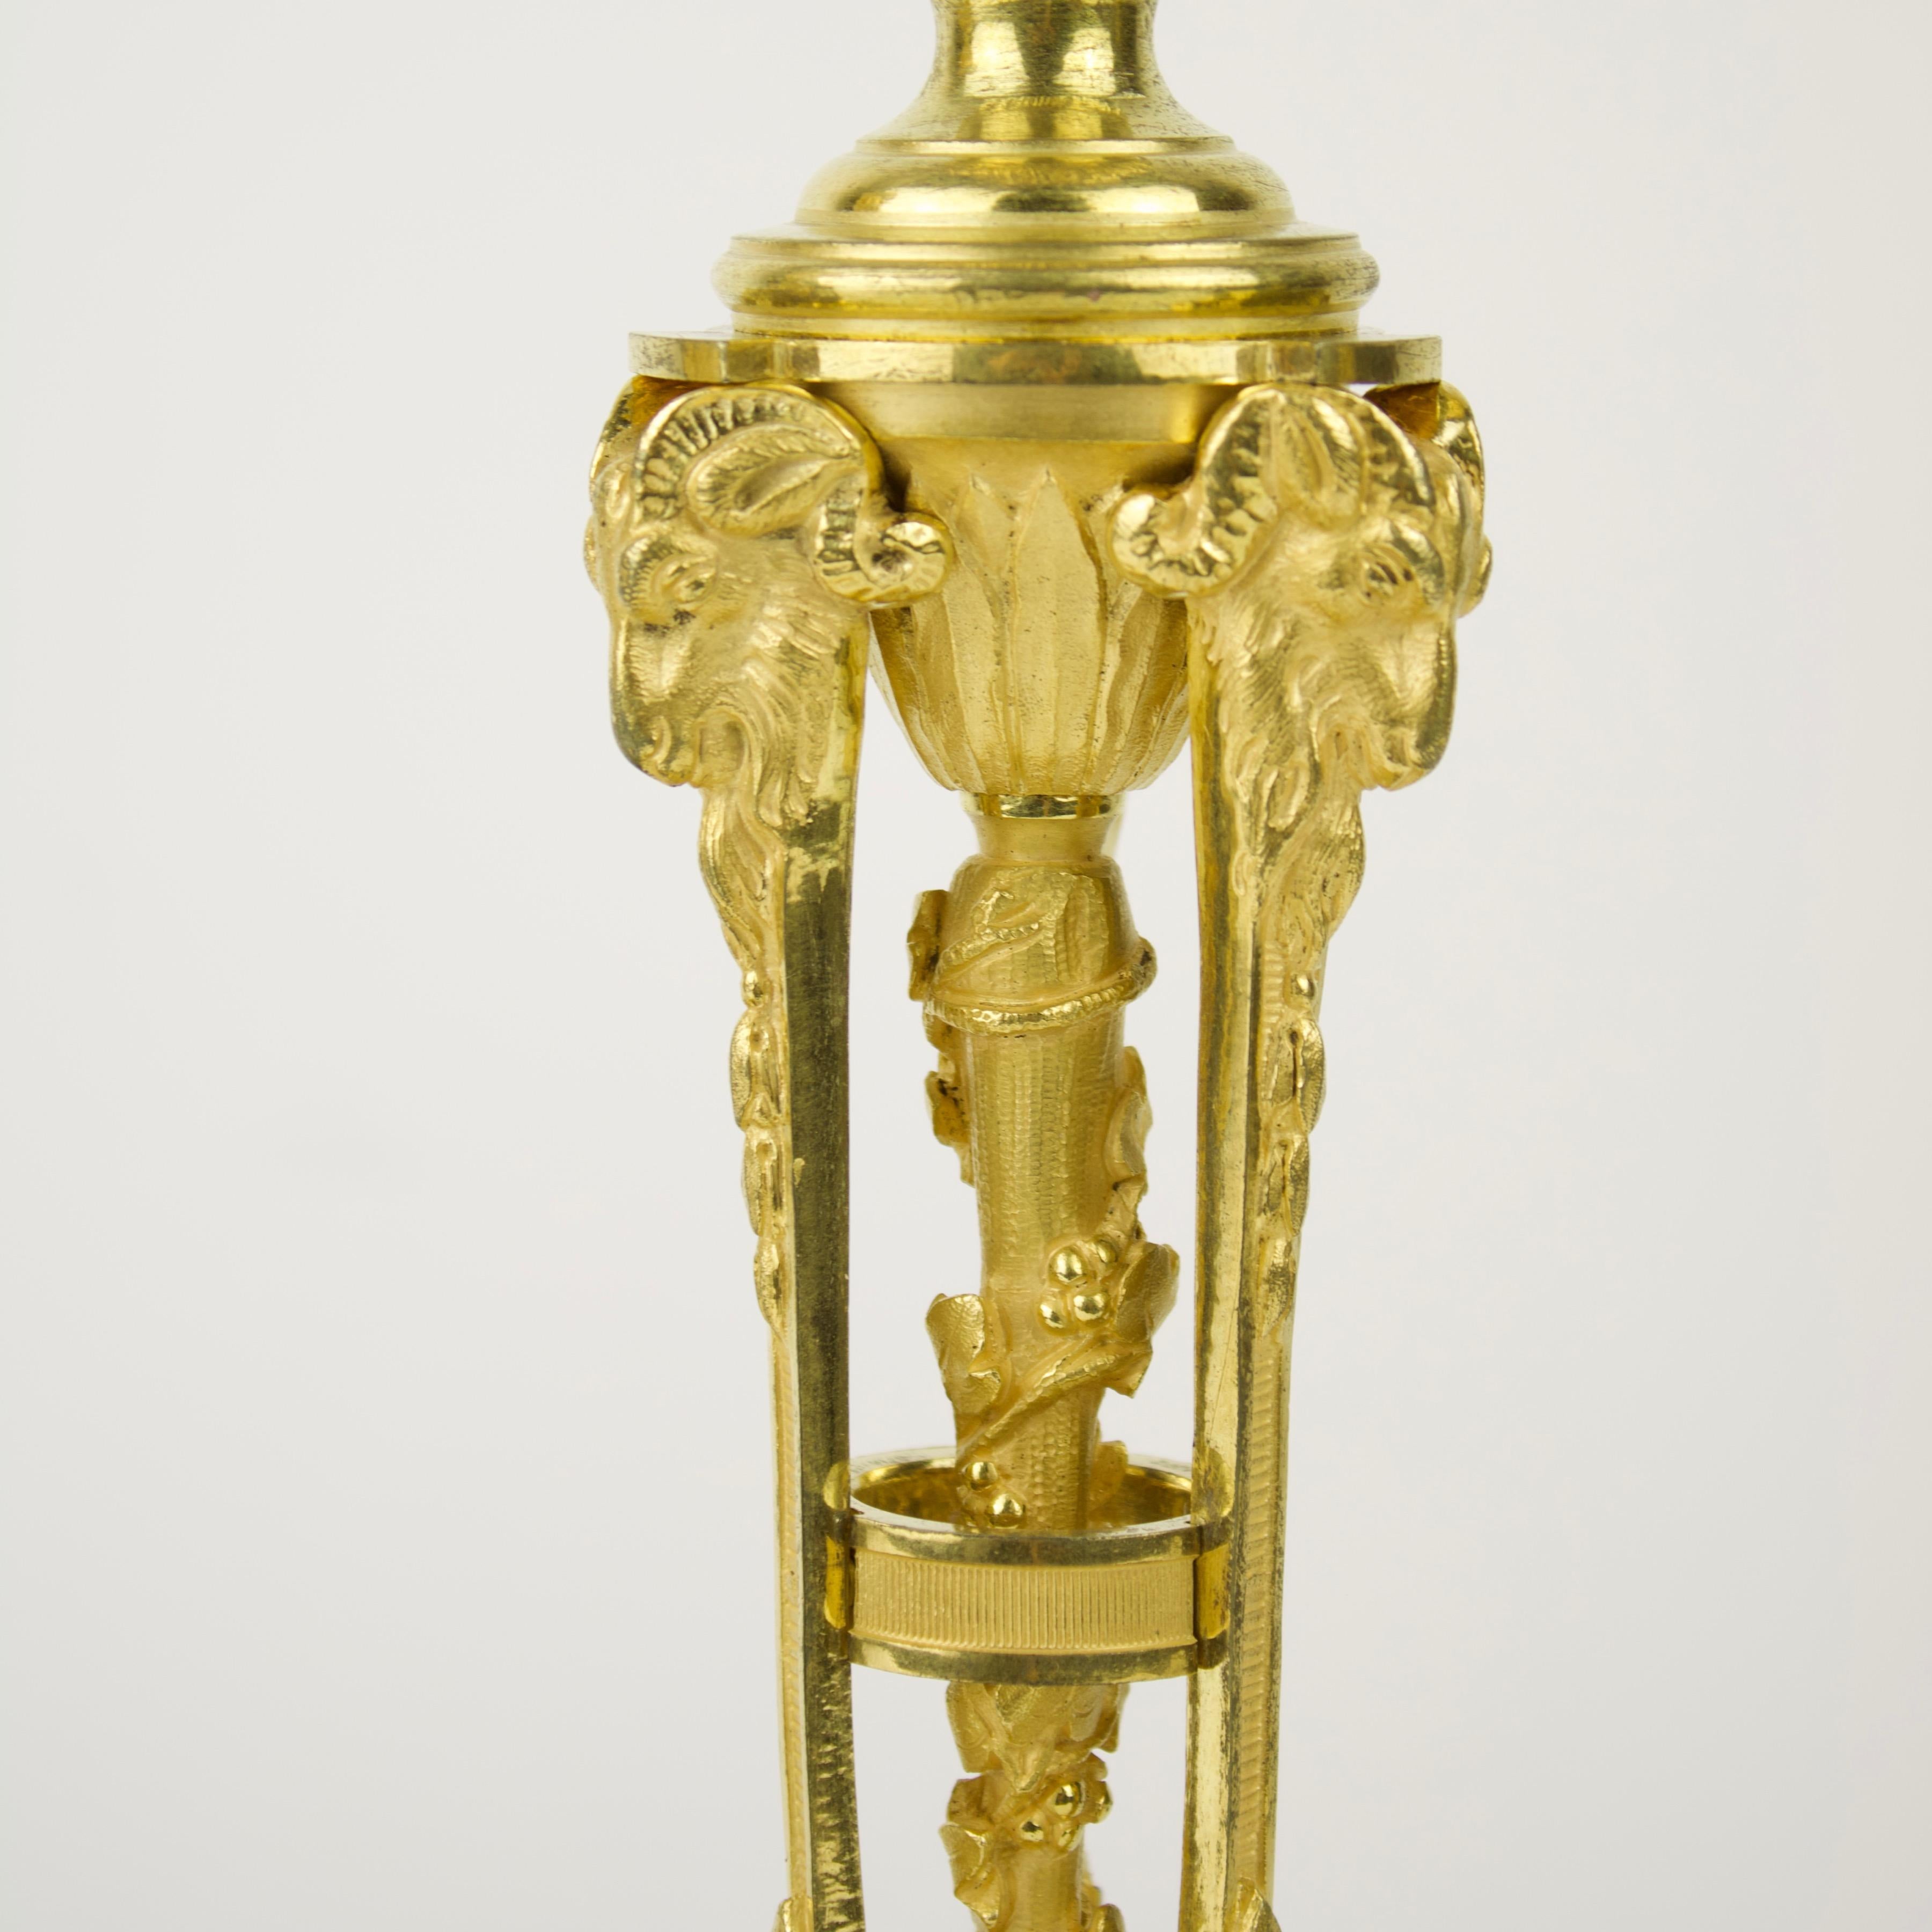 Pair of Early 19th Century Louis XVI Gilt Bronze Candlesticks after Martincourt For Sale 1